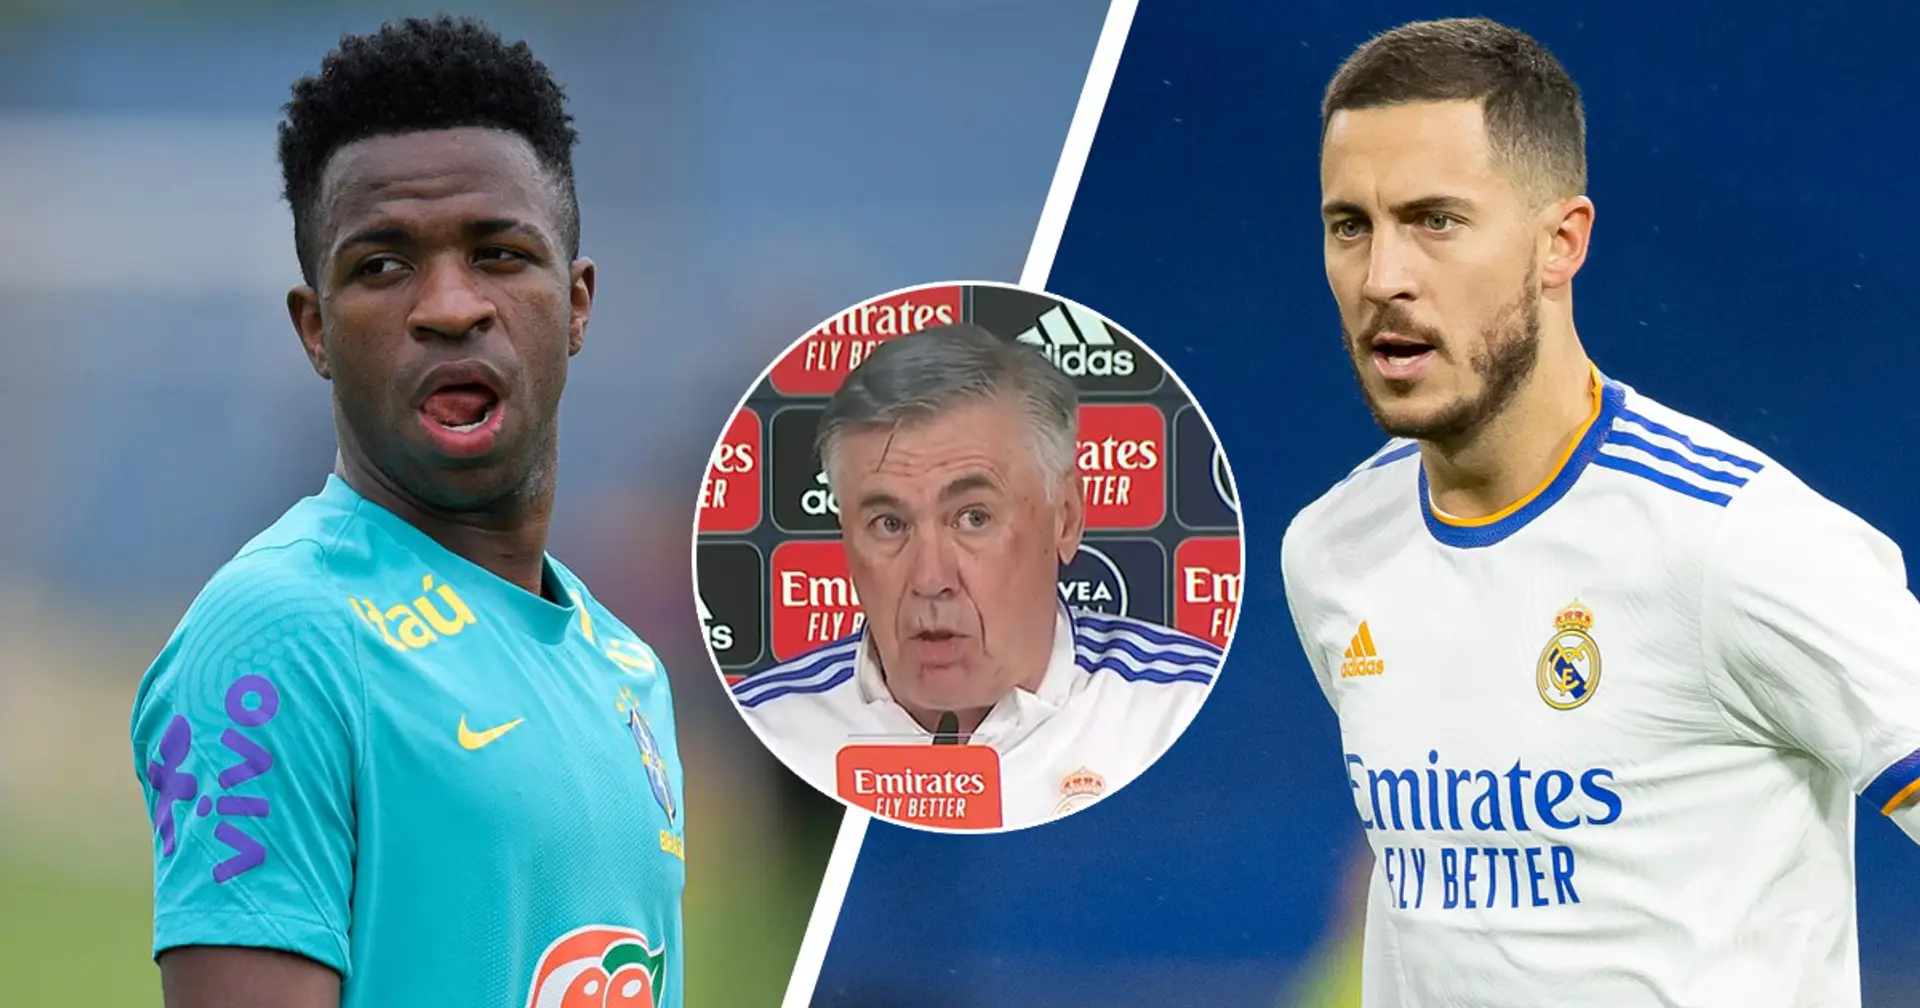 Ancelotti opens up on the condition of Brazil internationals ahead of Bilbao, says Hazard and Bale could start